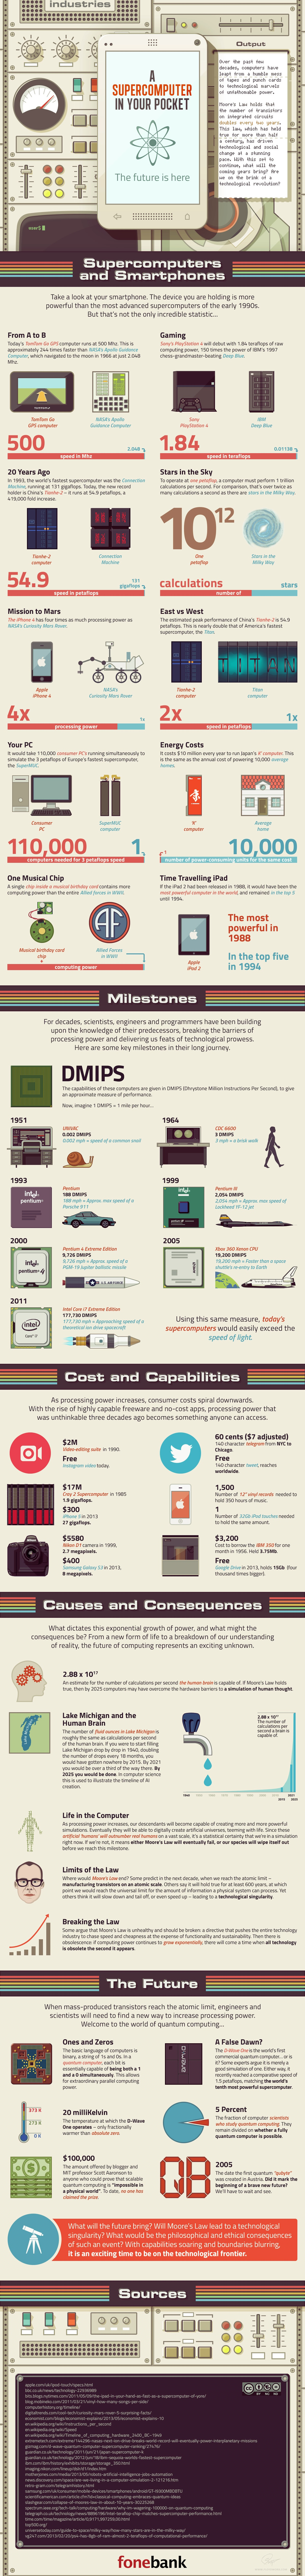 infographic-about-computers_547764034c660[1]